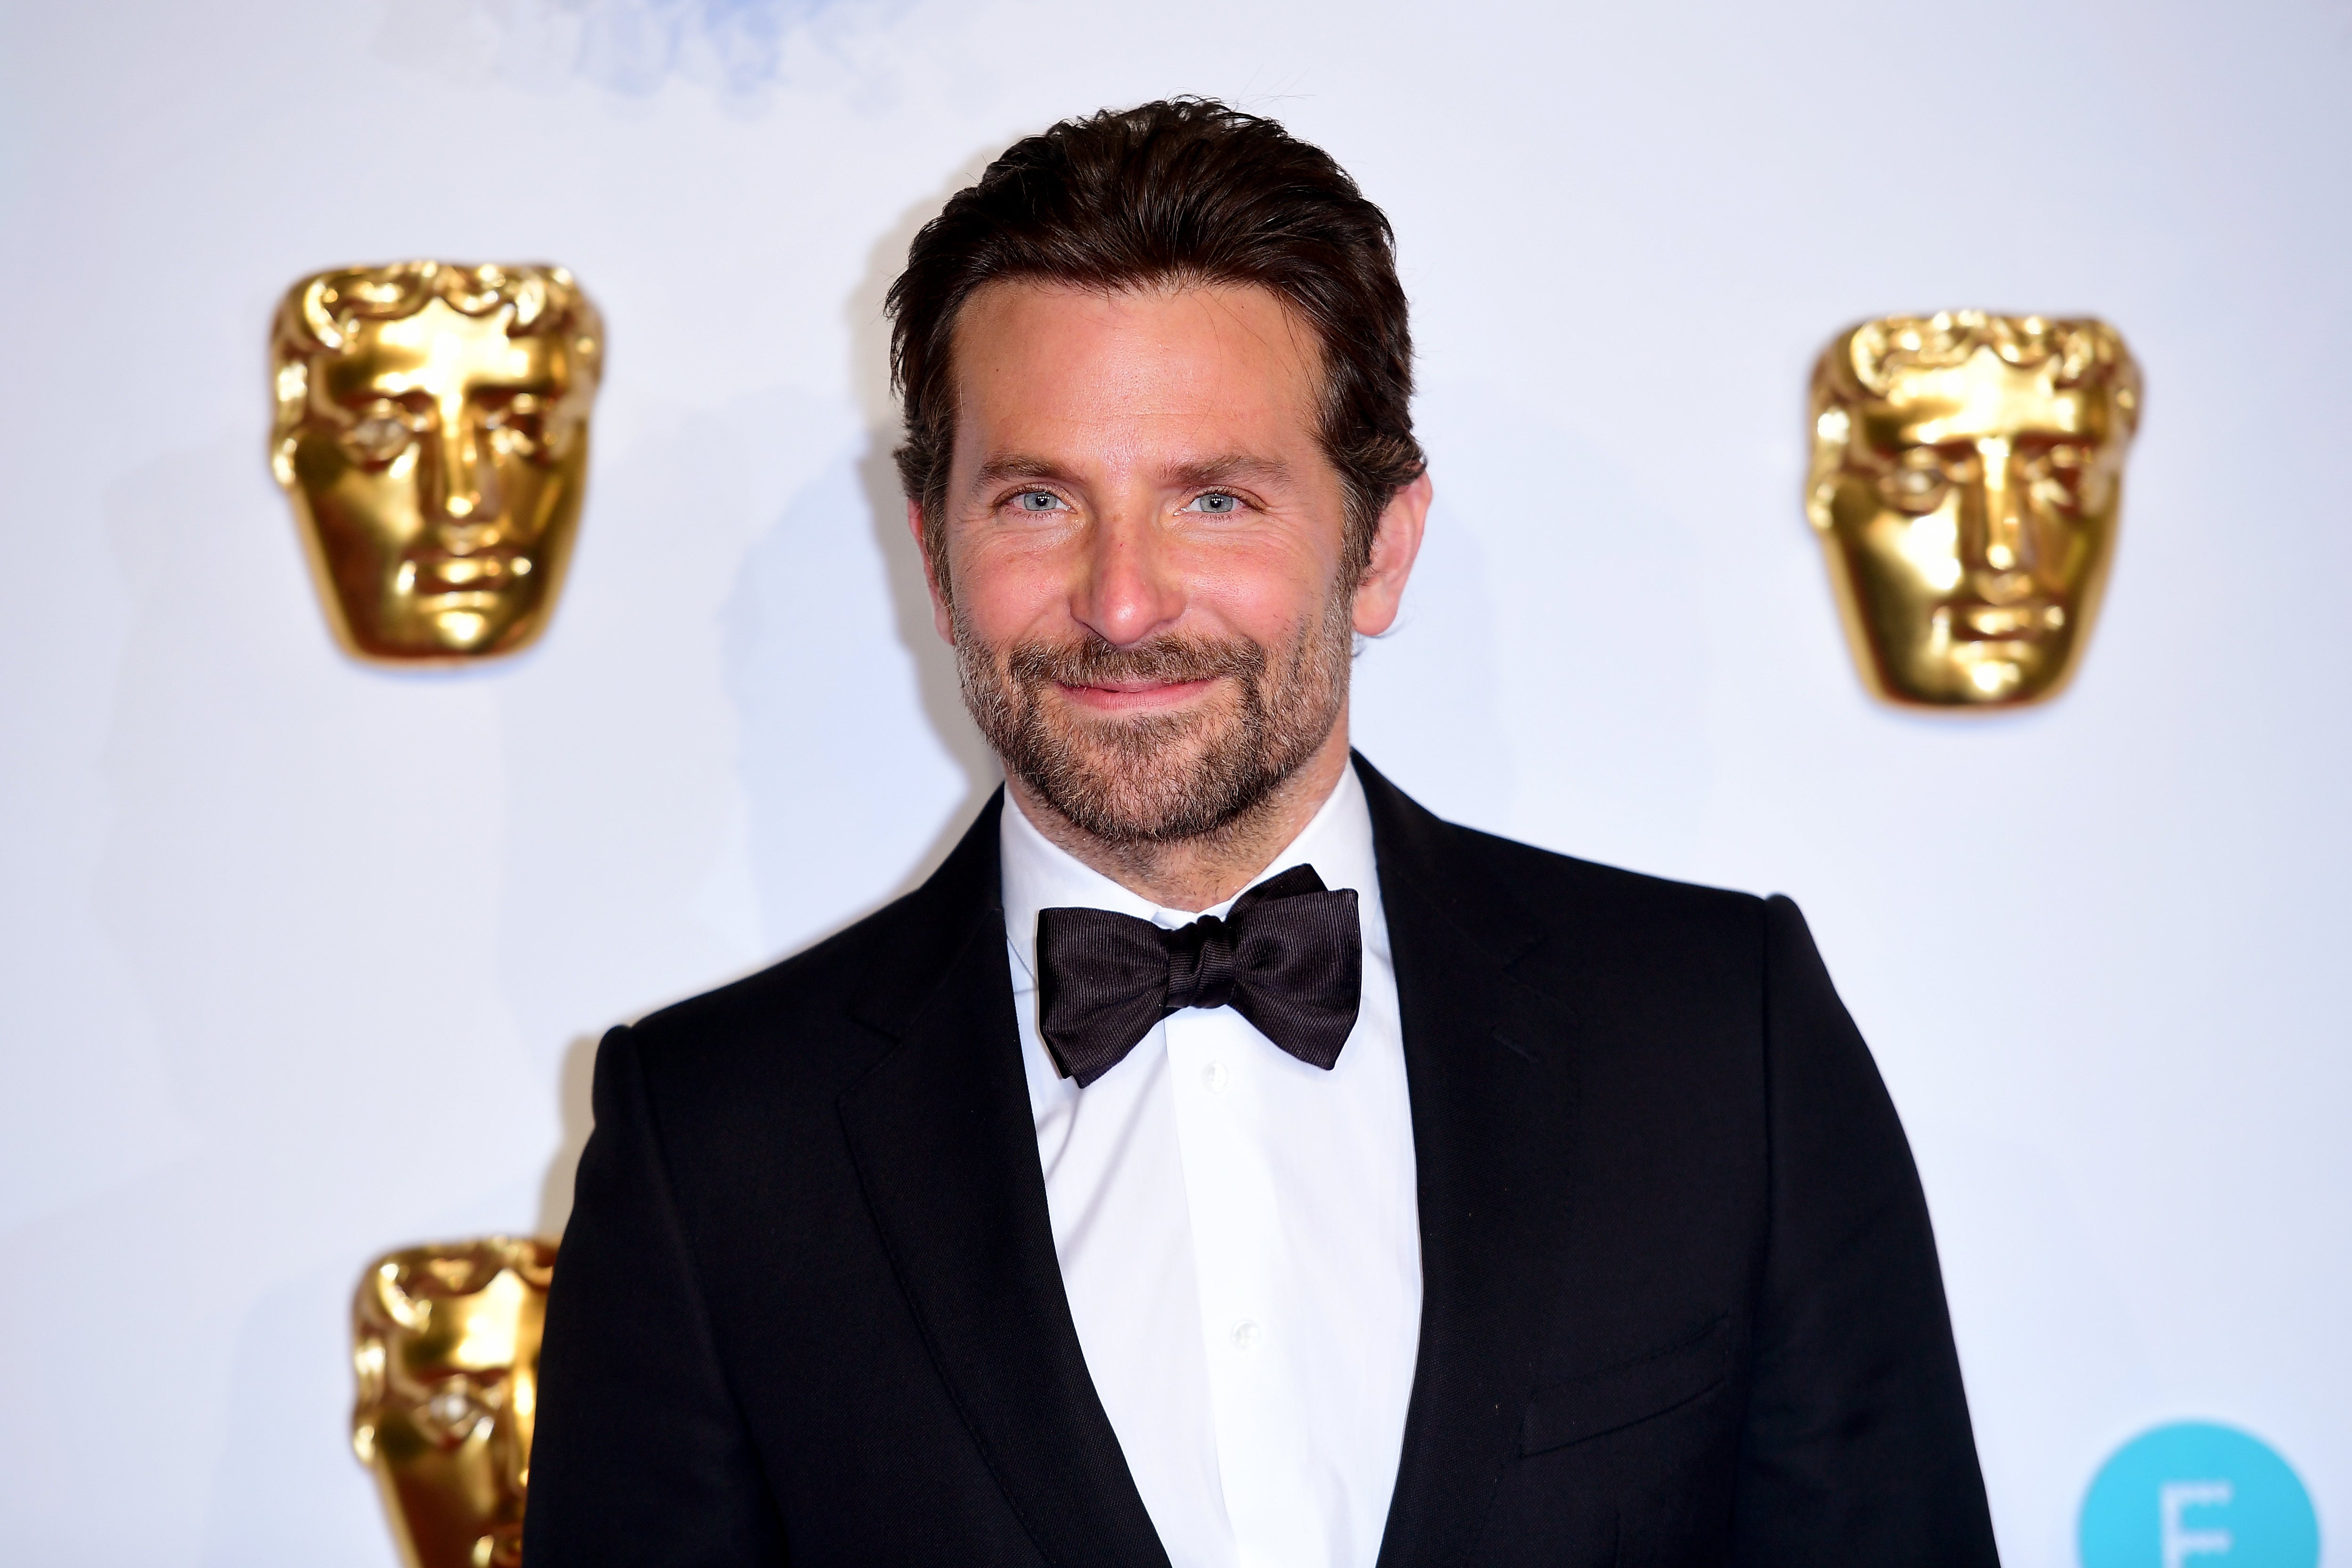 Bradley Cooper has opened up about his past addiction issues (Ian West/PA)